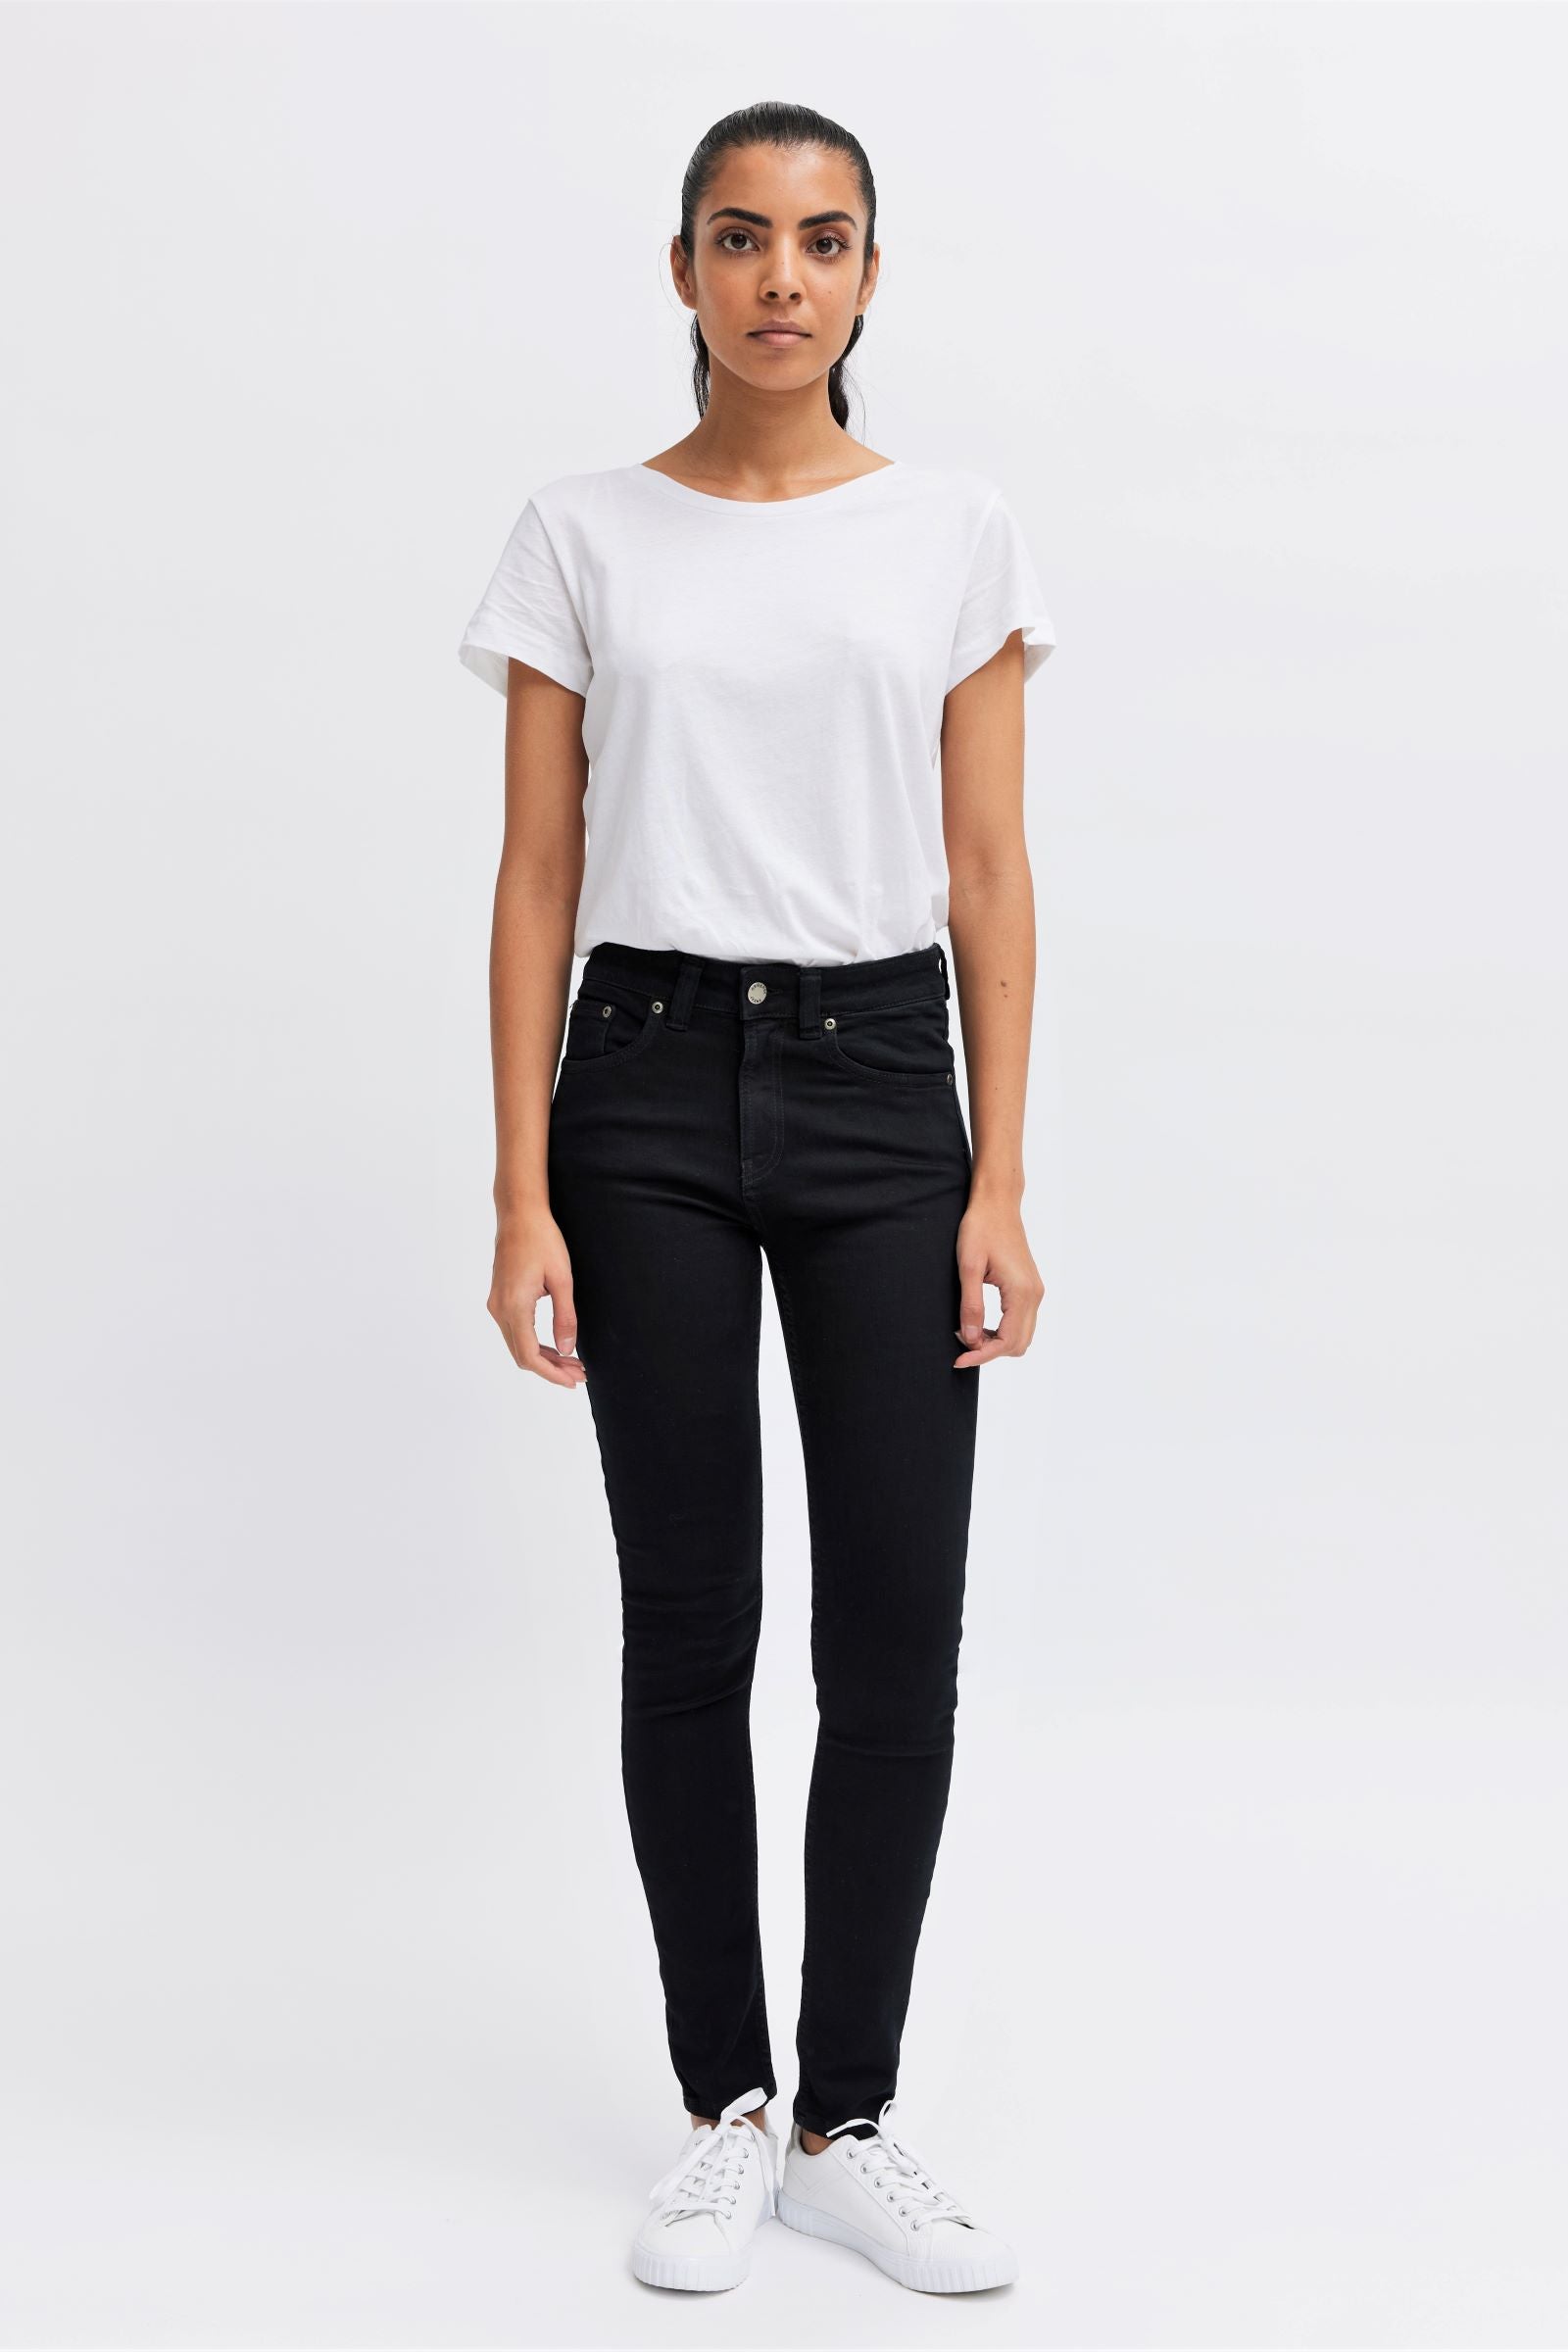 Black skinny jeans for women - Organic cotton, vegan and ethically made